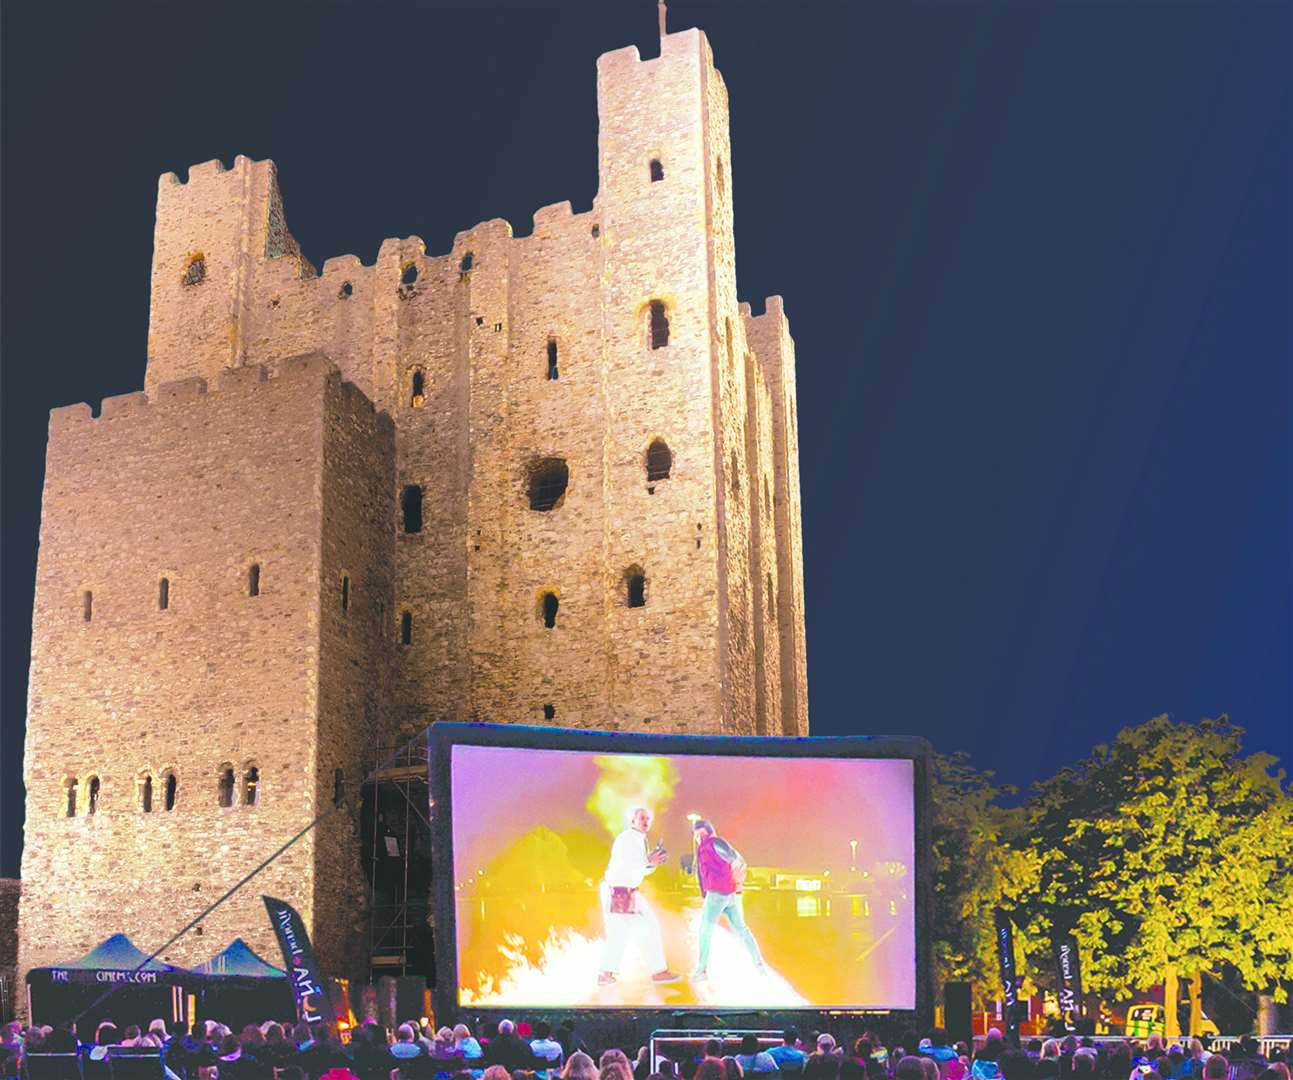 Get along to Rochester for four nights of live music and events beamed straight to the castle grounds